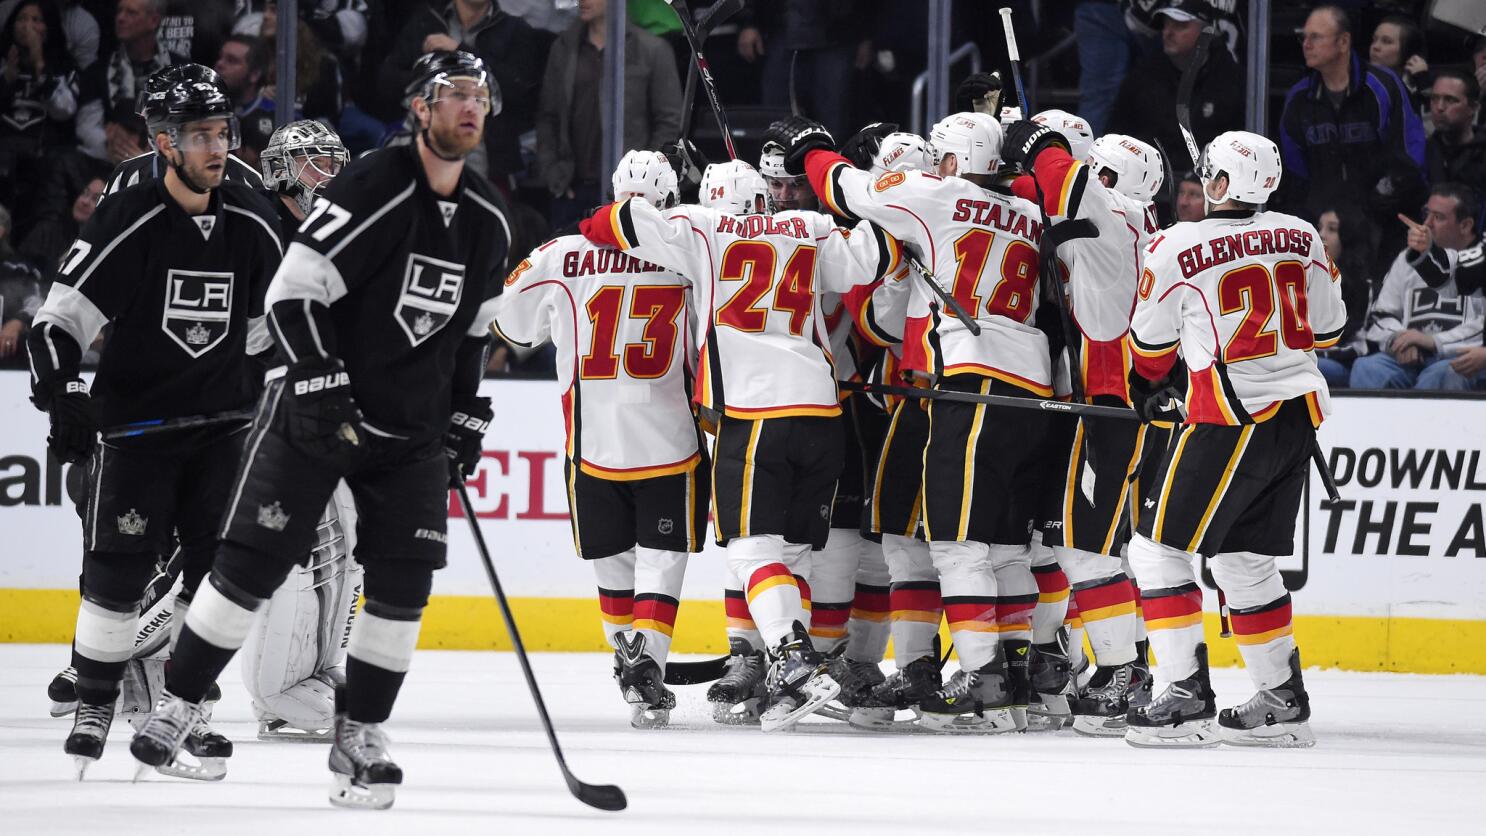 Flames fall flat in 8-2 loss to the Kings